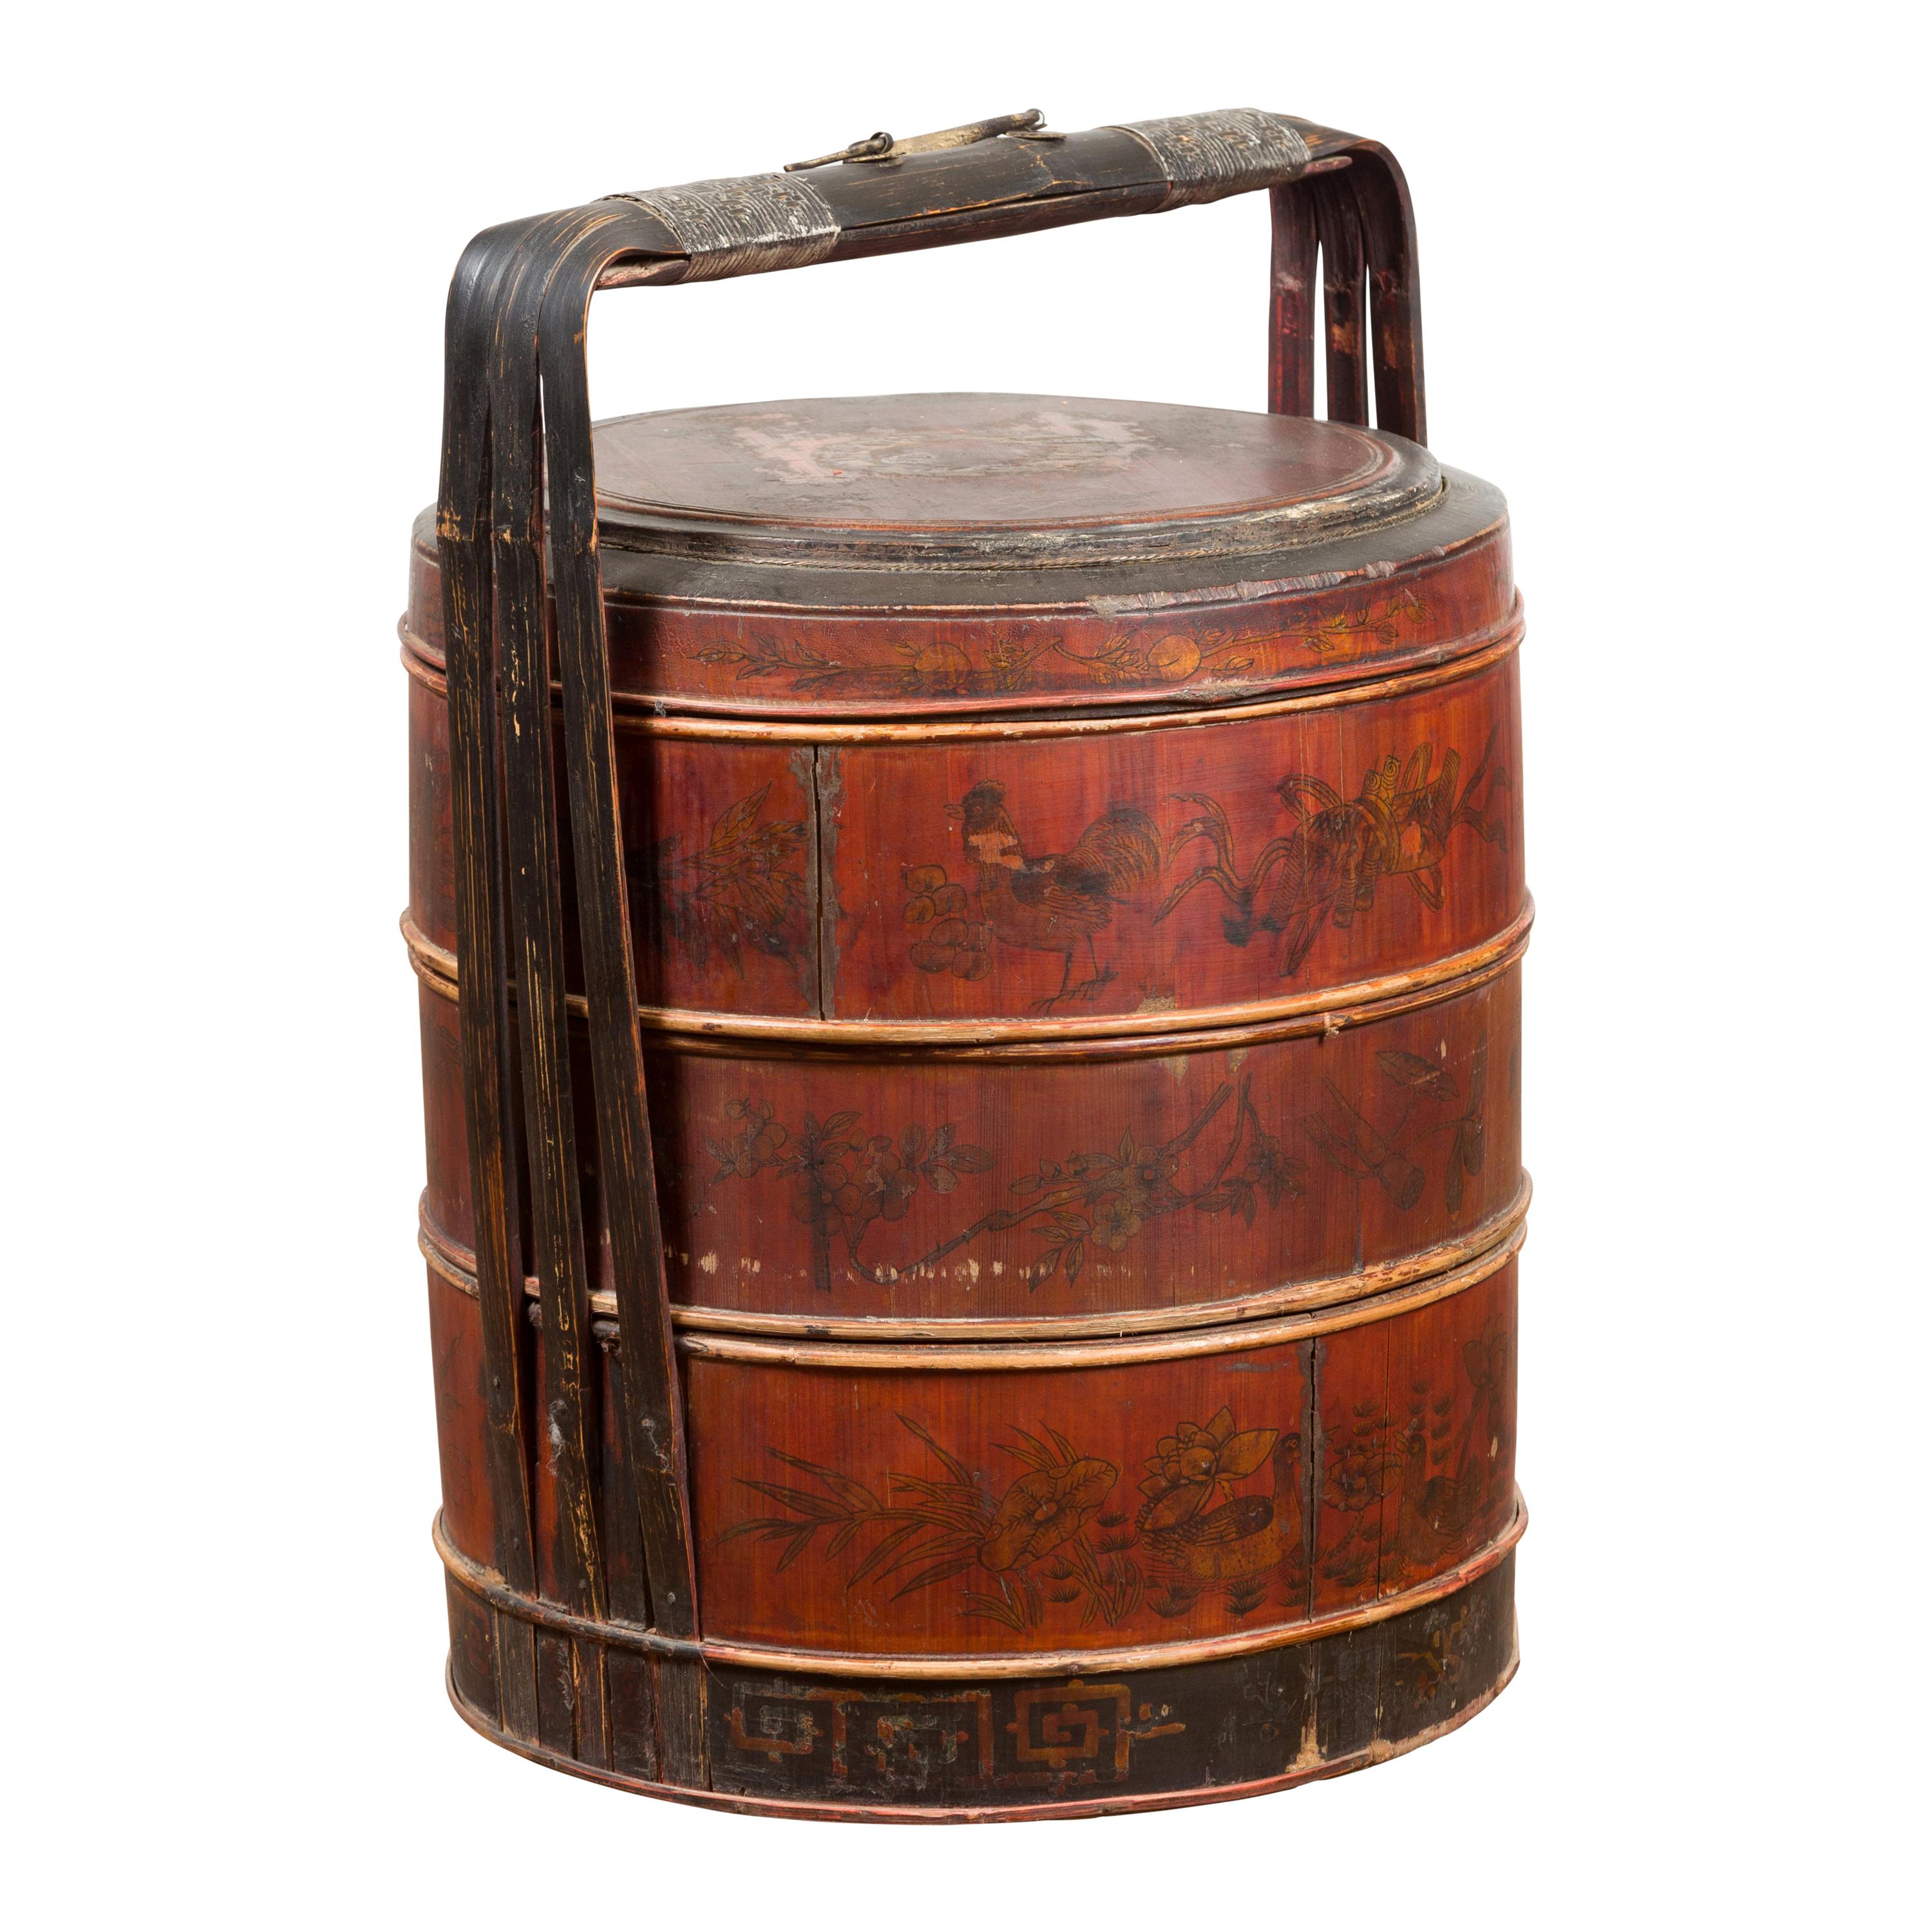 Chinese Nested Bamboo Food Basket with Hand-Painted Décor and Large Handle